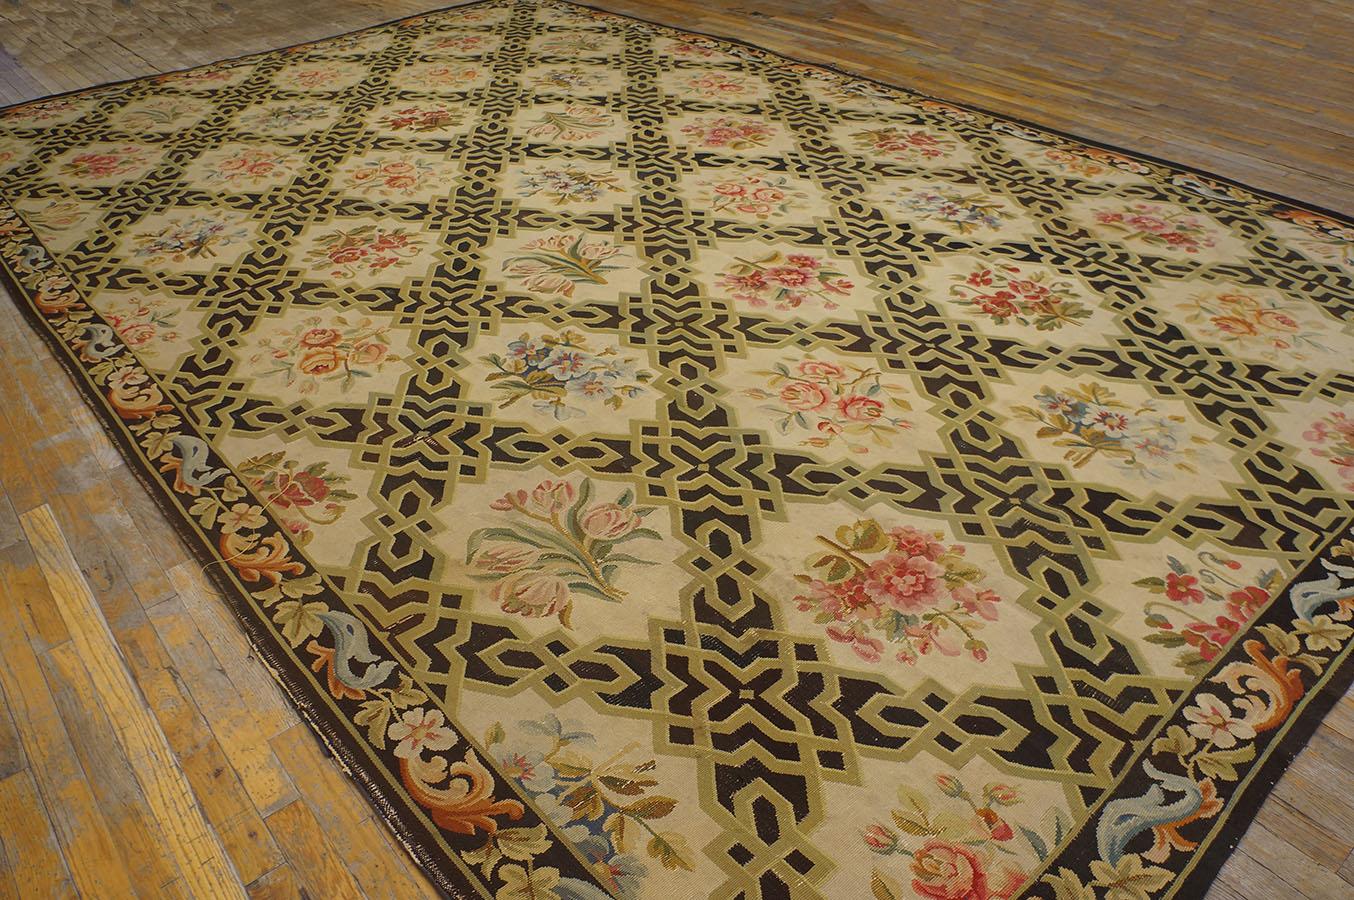 Hand-Woven Early 20th Century French Aubusson Carpet ( 9' 8'' x 15' 3'' - 295 x 465 cm ) For Sale